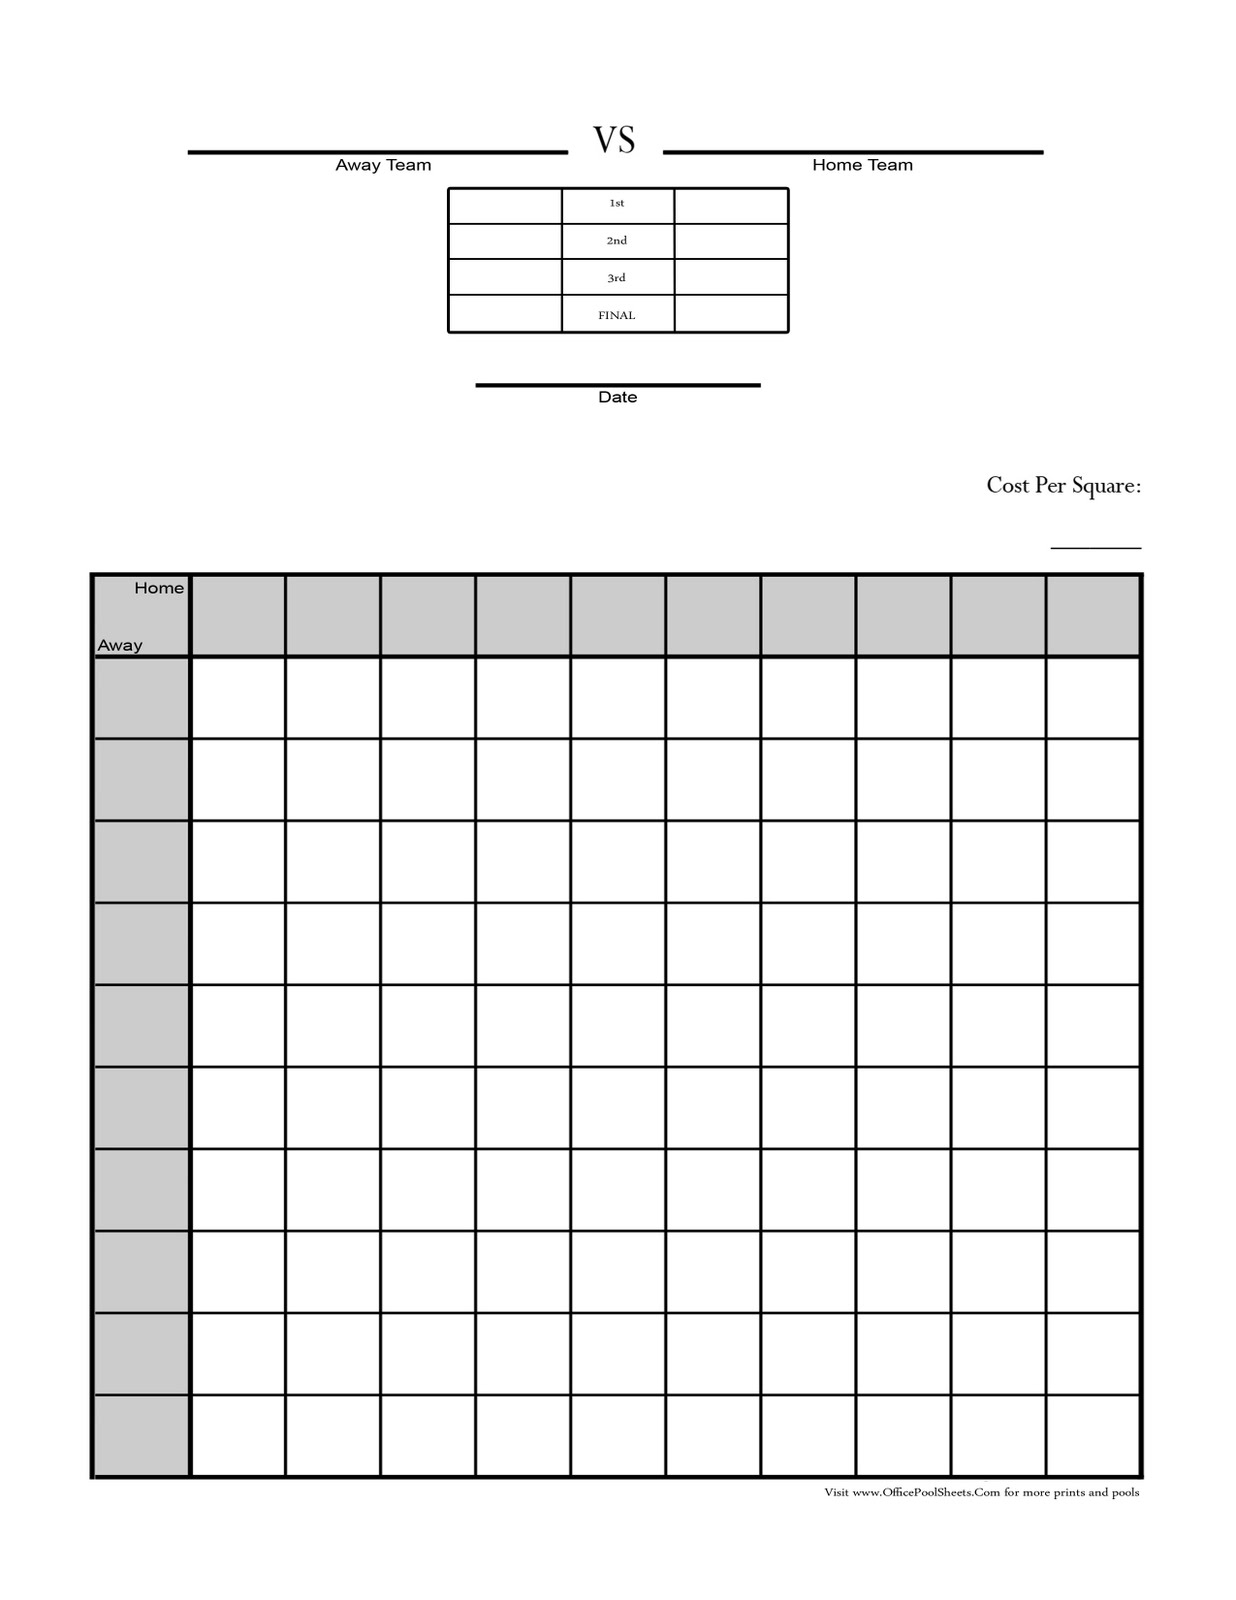 23 Images of Football Pot Squares Template 100 | boatsee.com